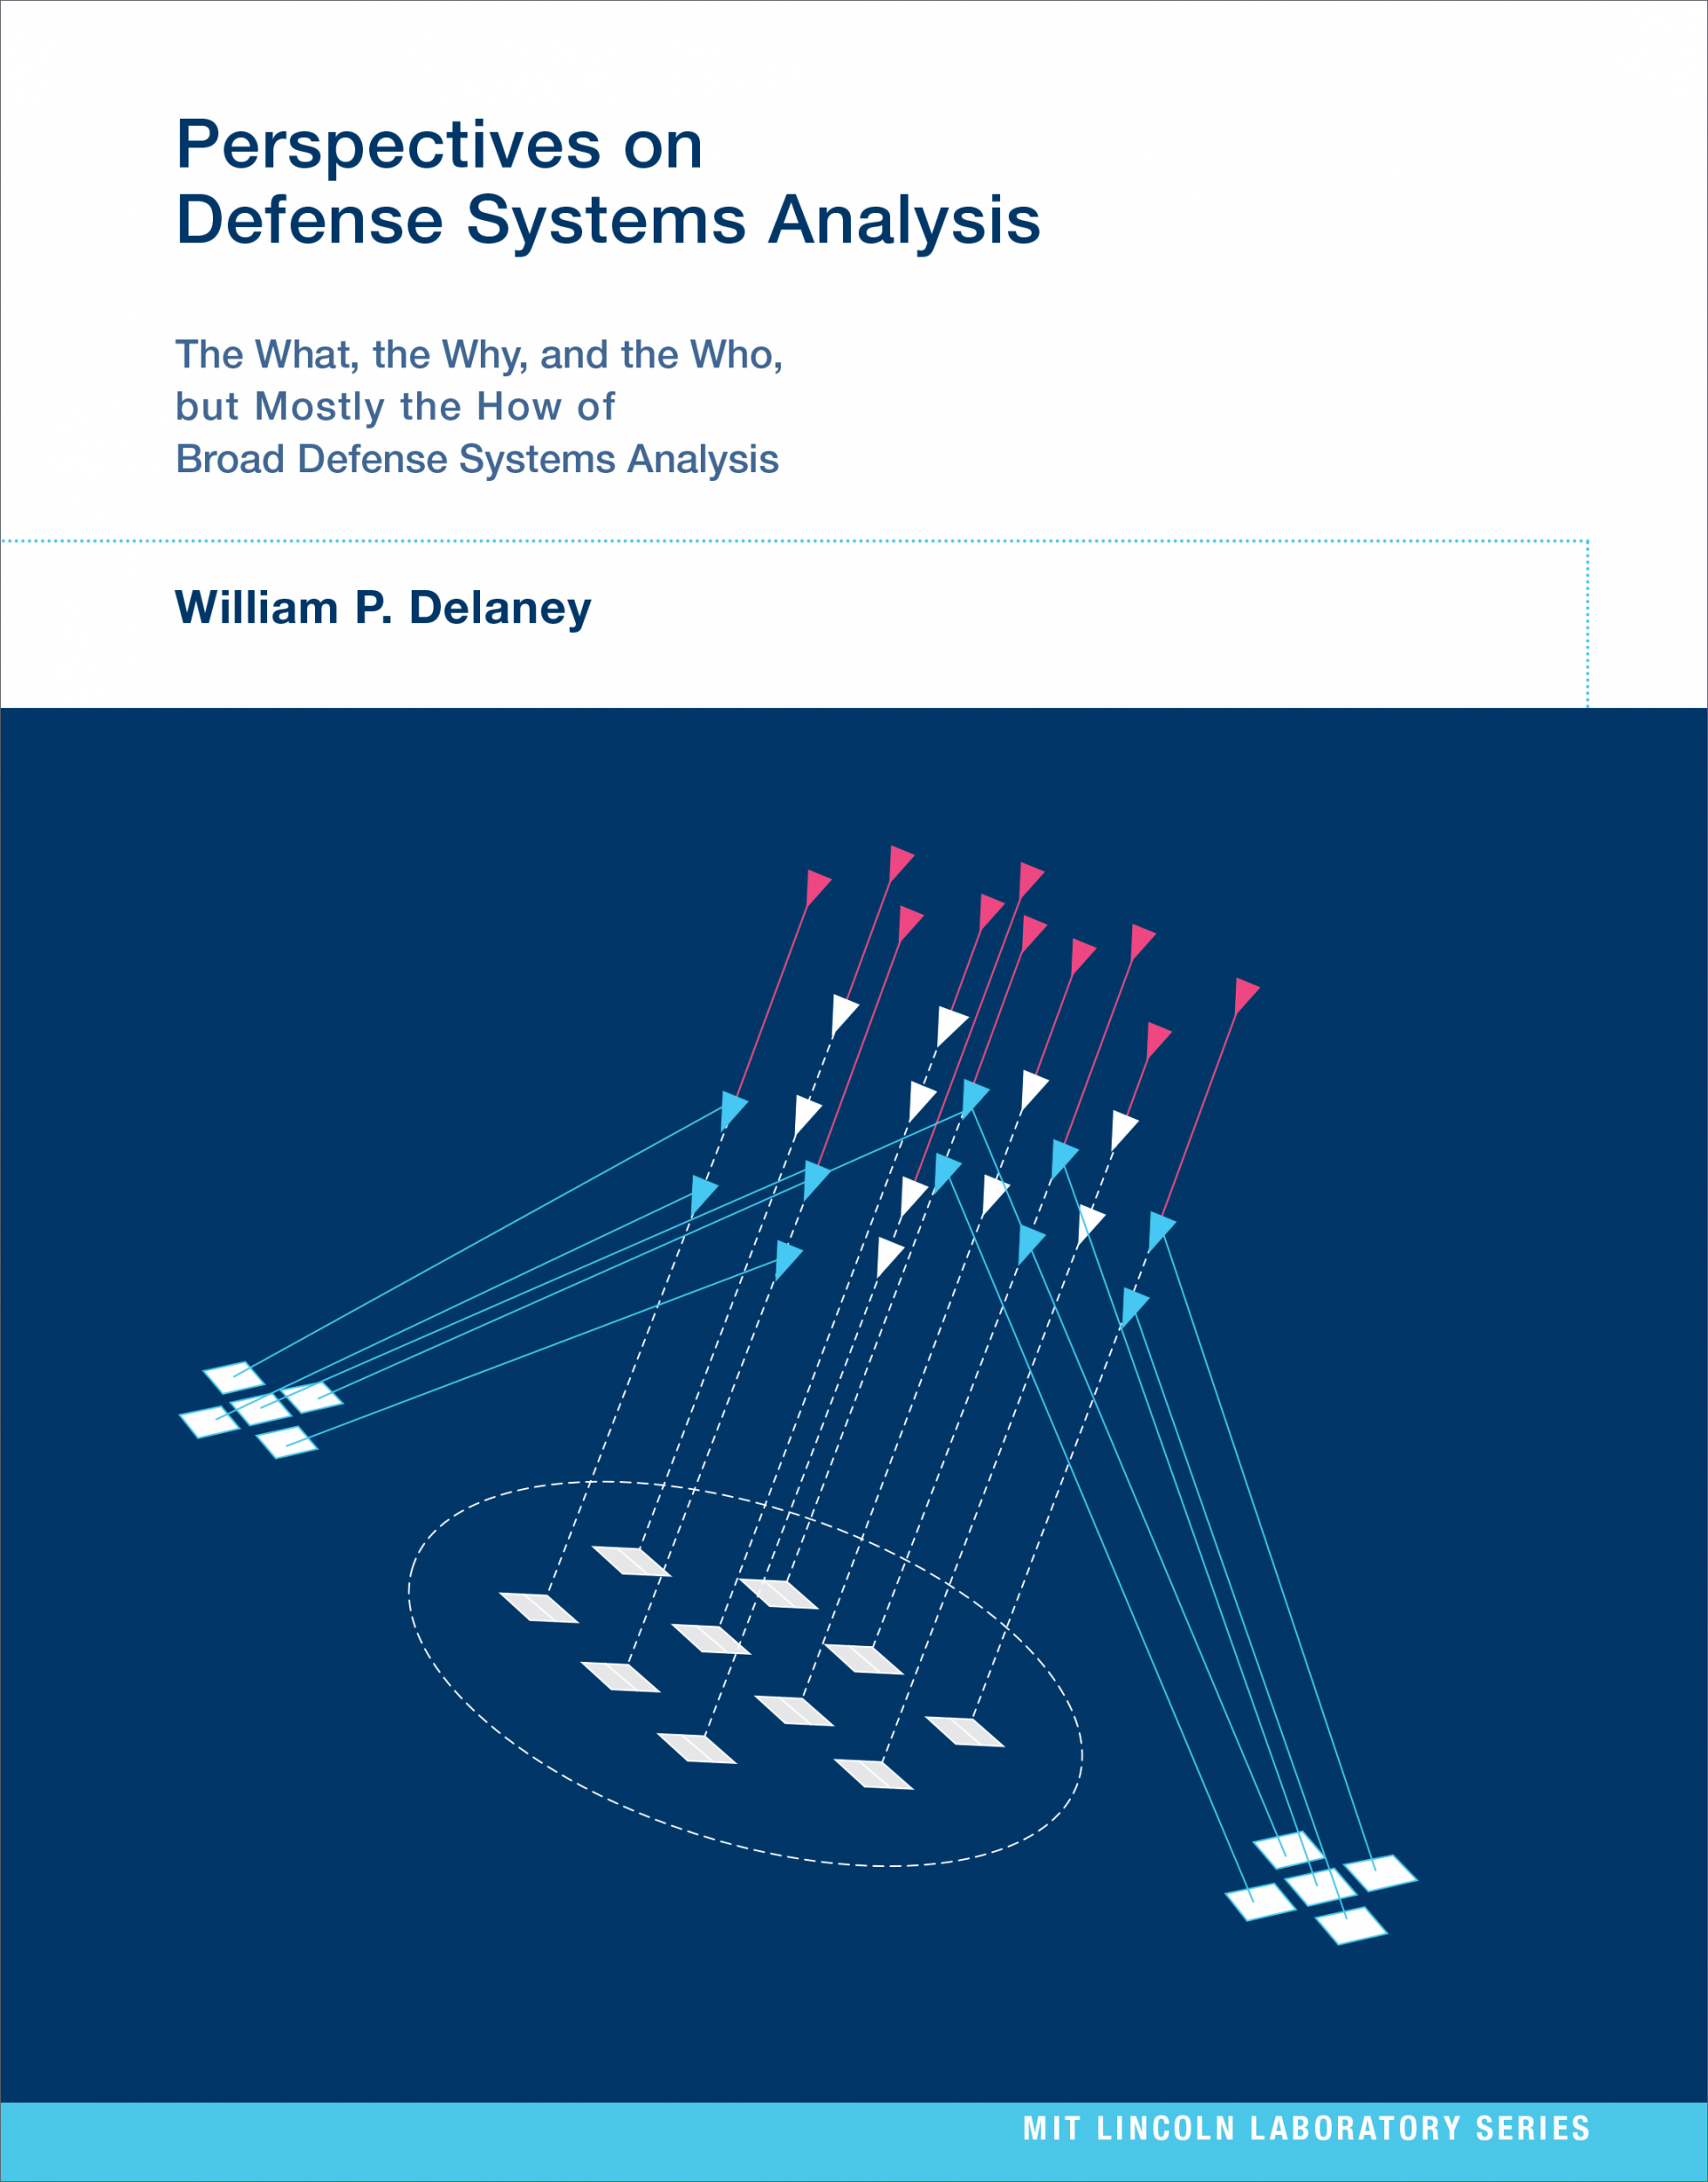 Perspectives on Defense Systems Analysis: The What, the Why, and the Who, But Mostly the How of Broad Defense Systems Analysis